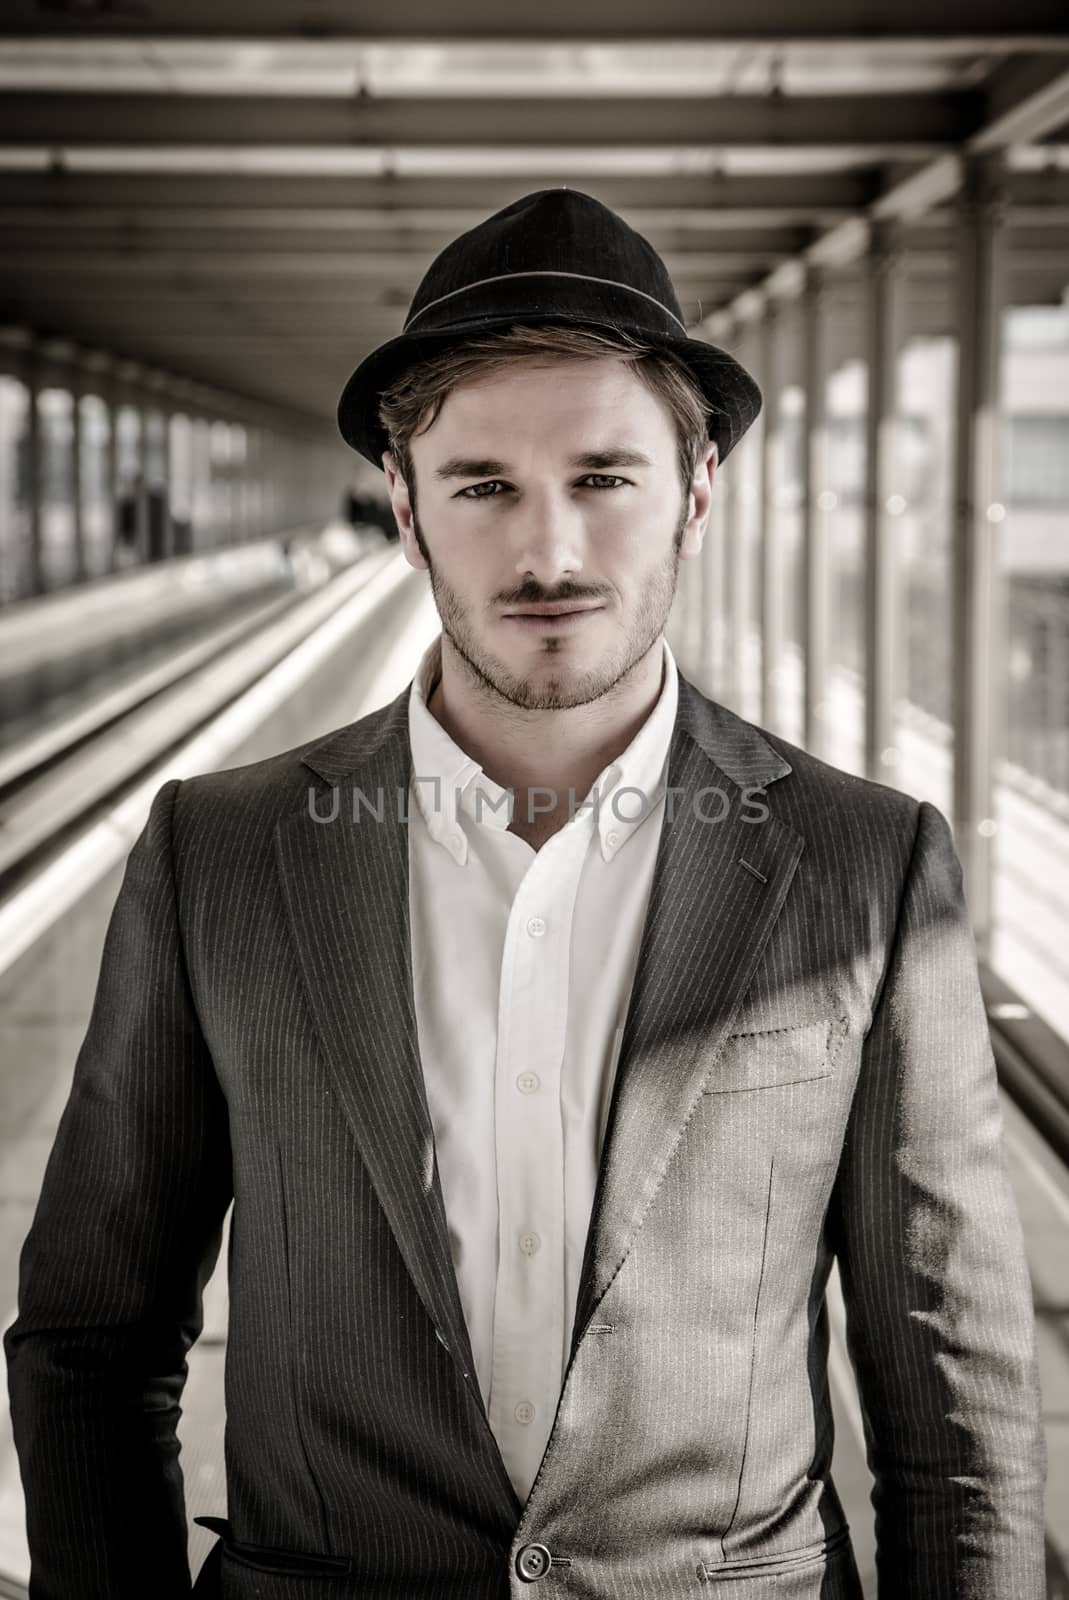 Head and Shoulders Portrait of Stylist Young Man Wearing Suit and Hat Looking at Camera While Standing on Moving Sidewalk in Building